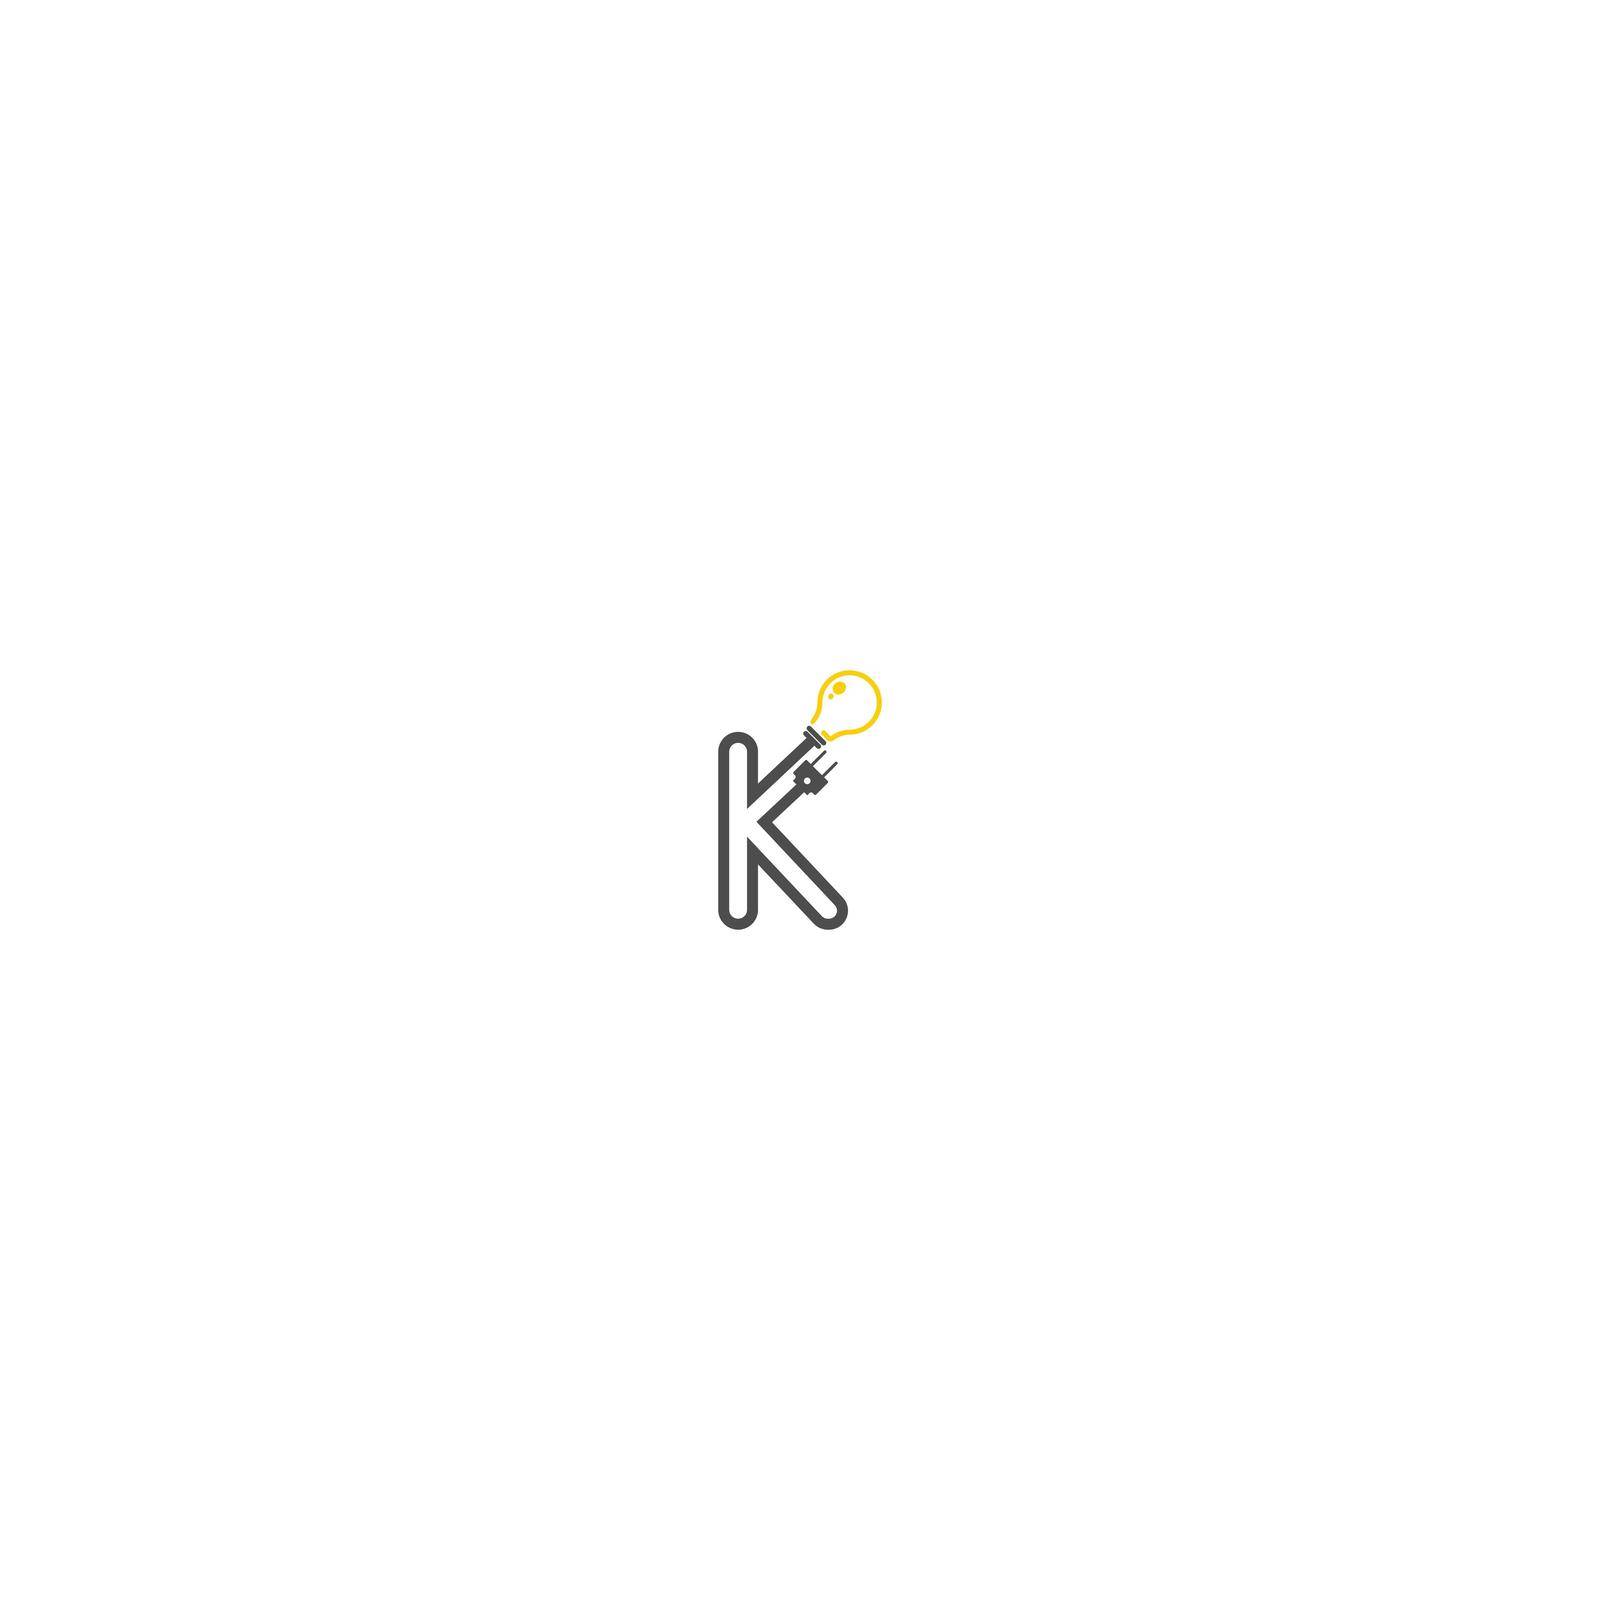 Letter K and podcast logotype combination design concept